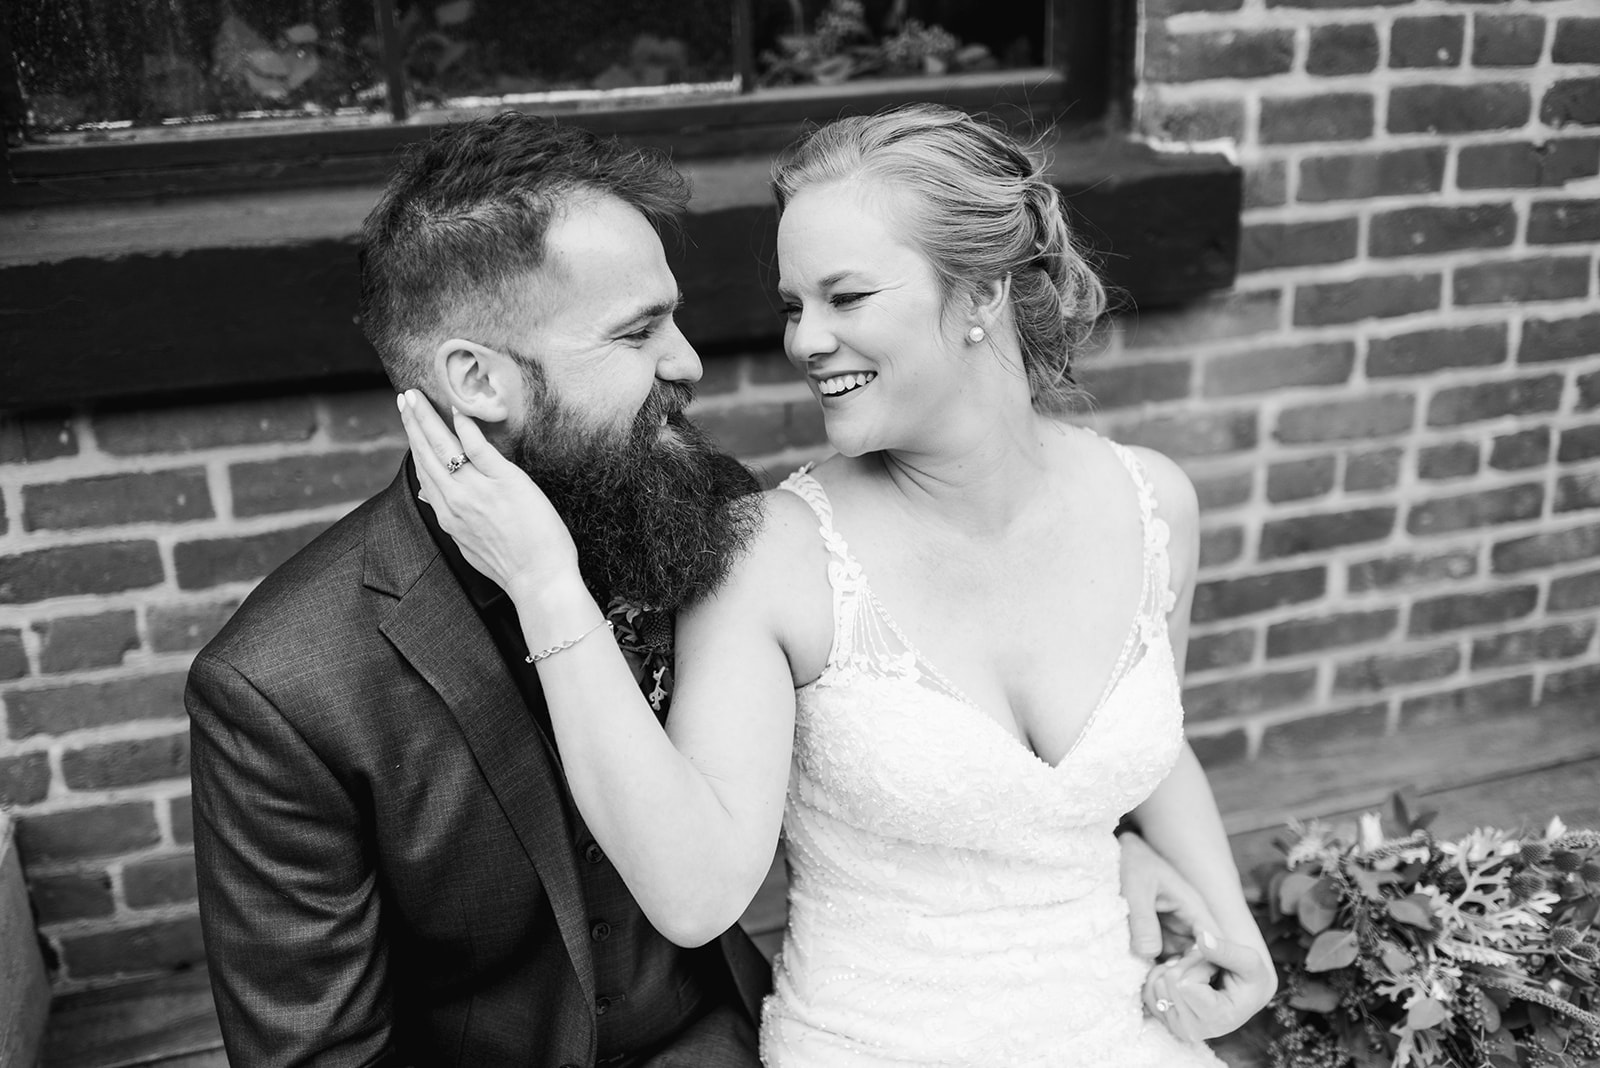 Black and white wedding photography: Nashville wedding at Clementine featured on Nashville Bride Guide